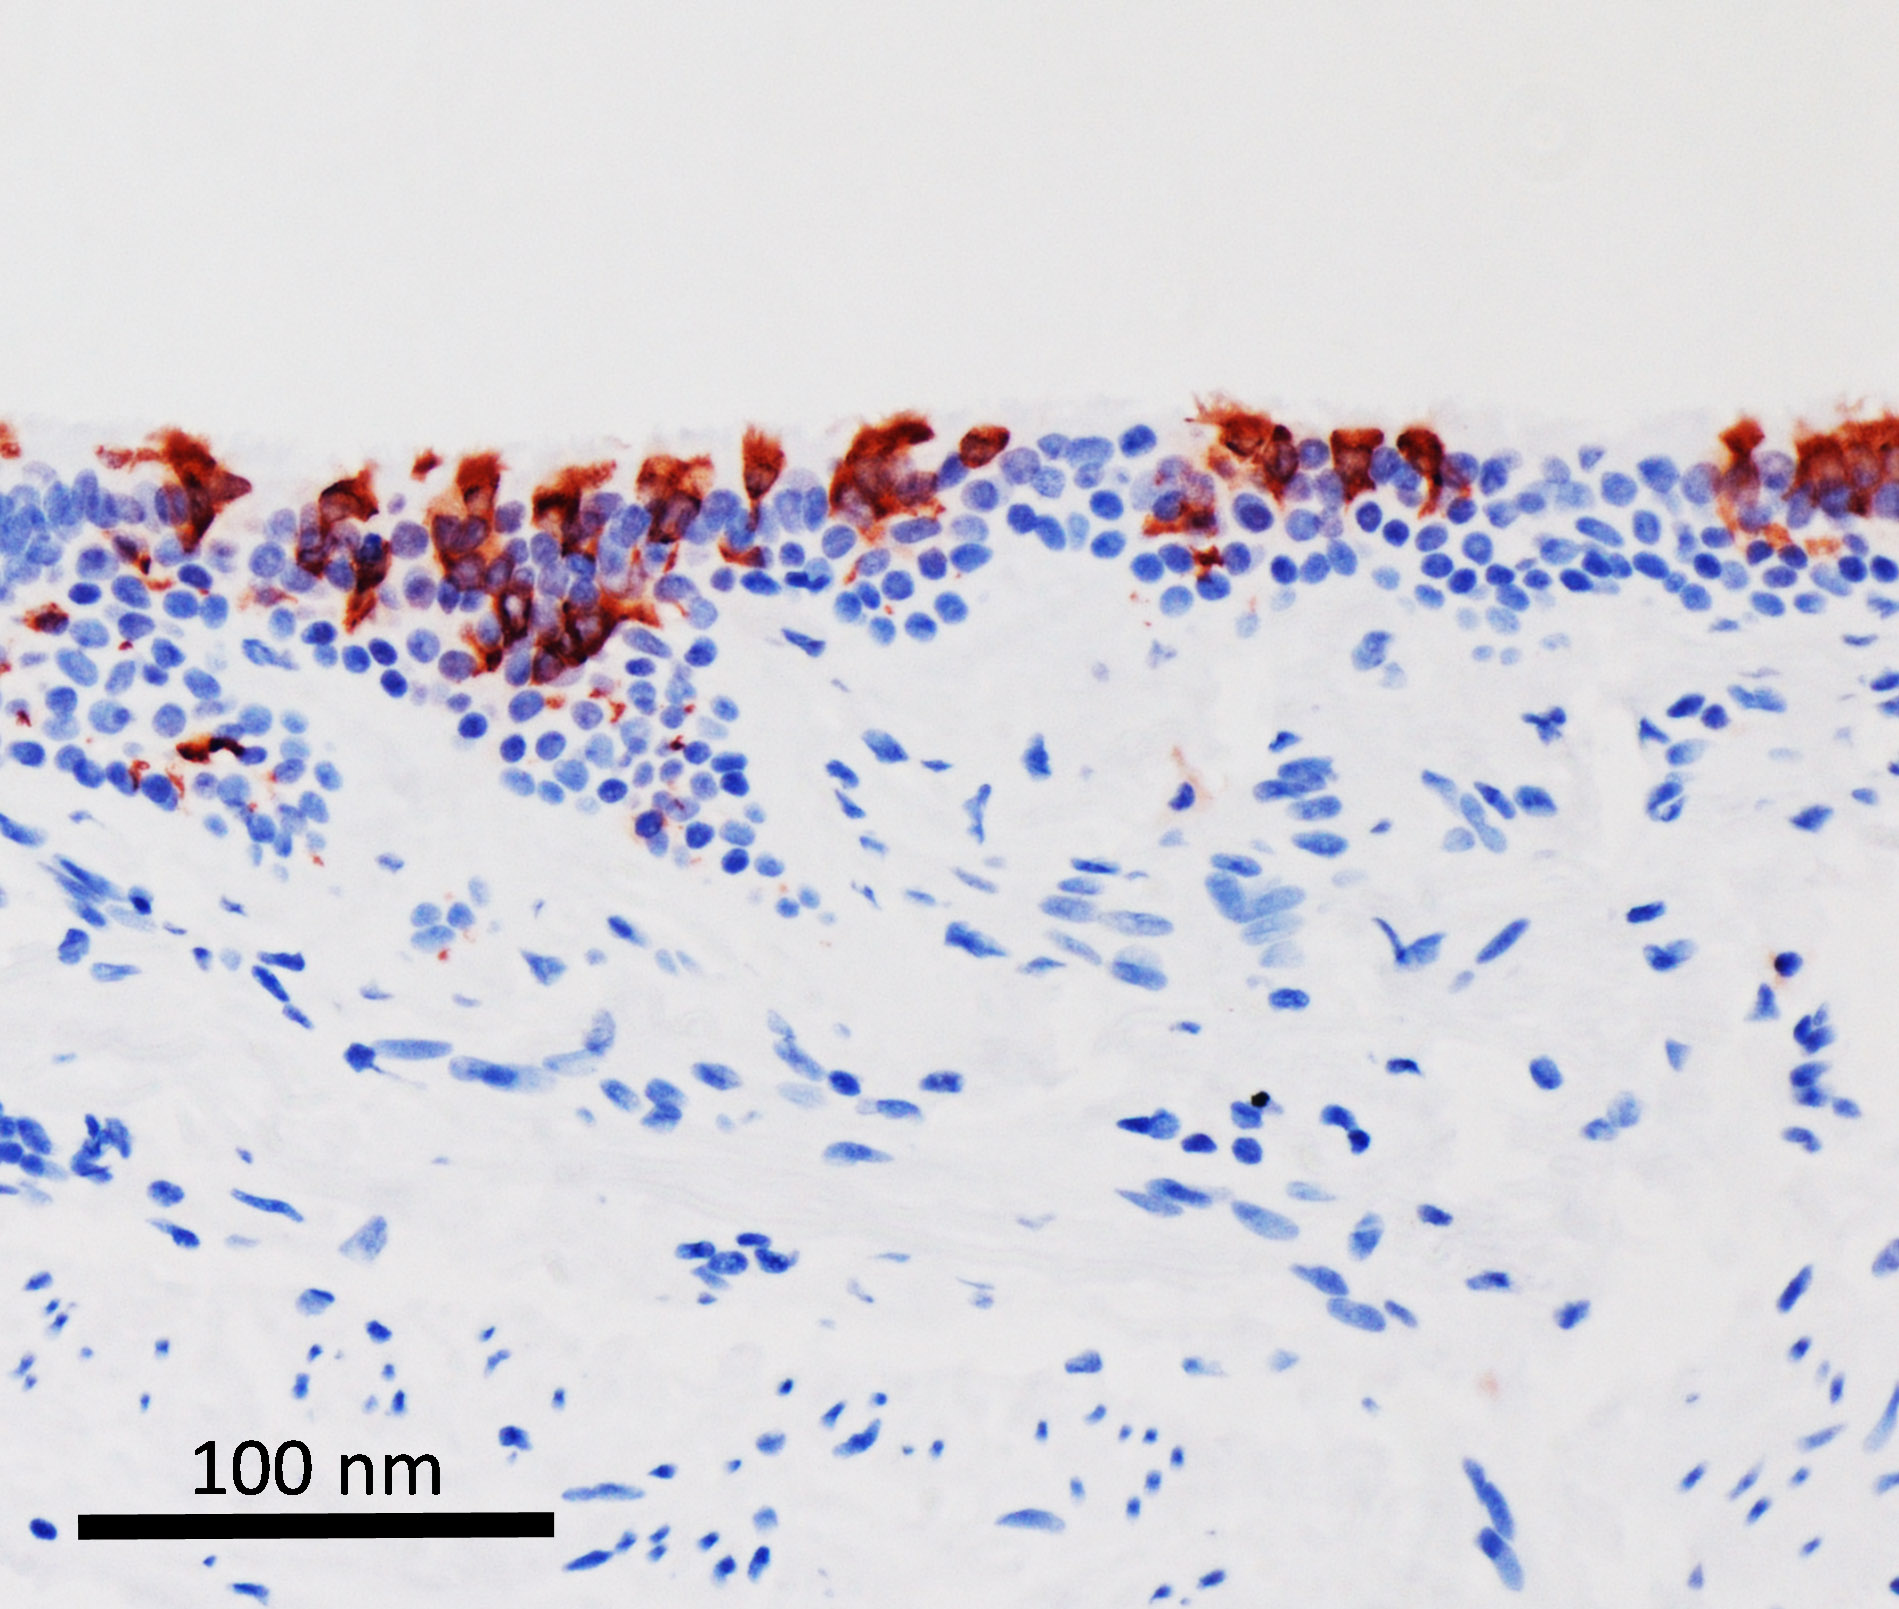 Omicron variant of SARS-CoV-2 (in red) infected human bronchus tissues.